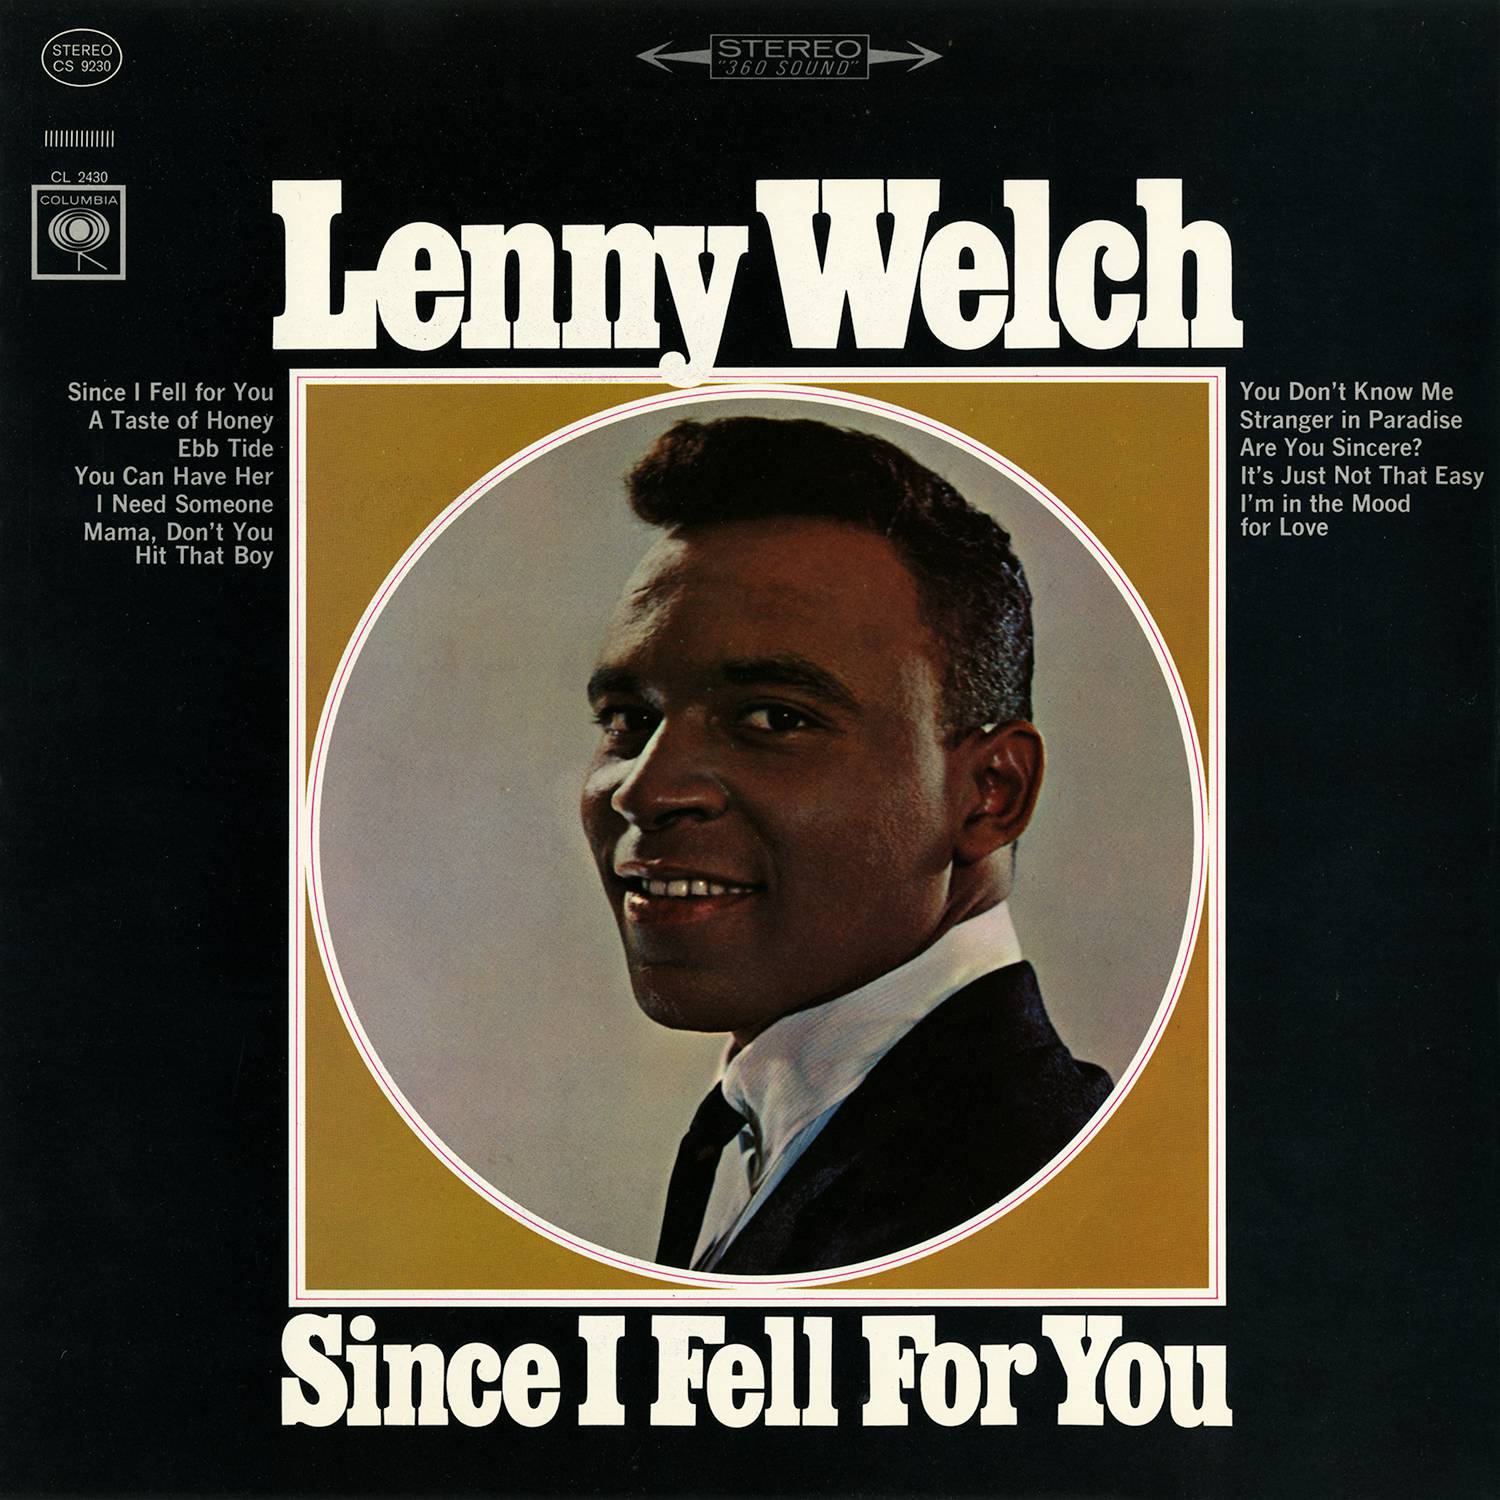 Lenny Welch - Since I Fell For You (1963/2015) [AcousticSounds FLAC 24bit/96kHz]